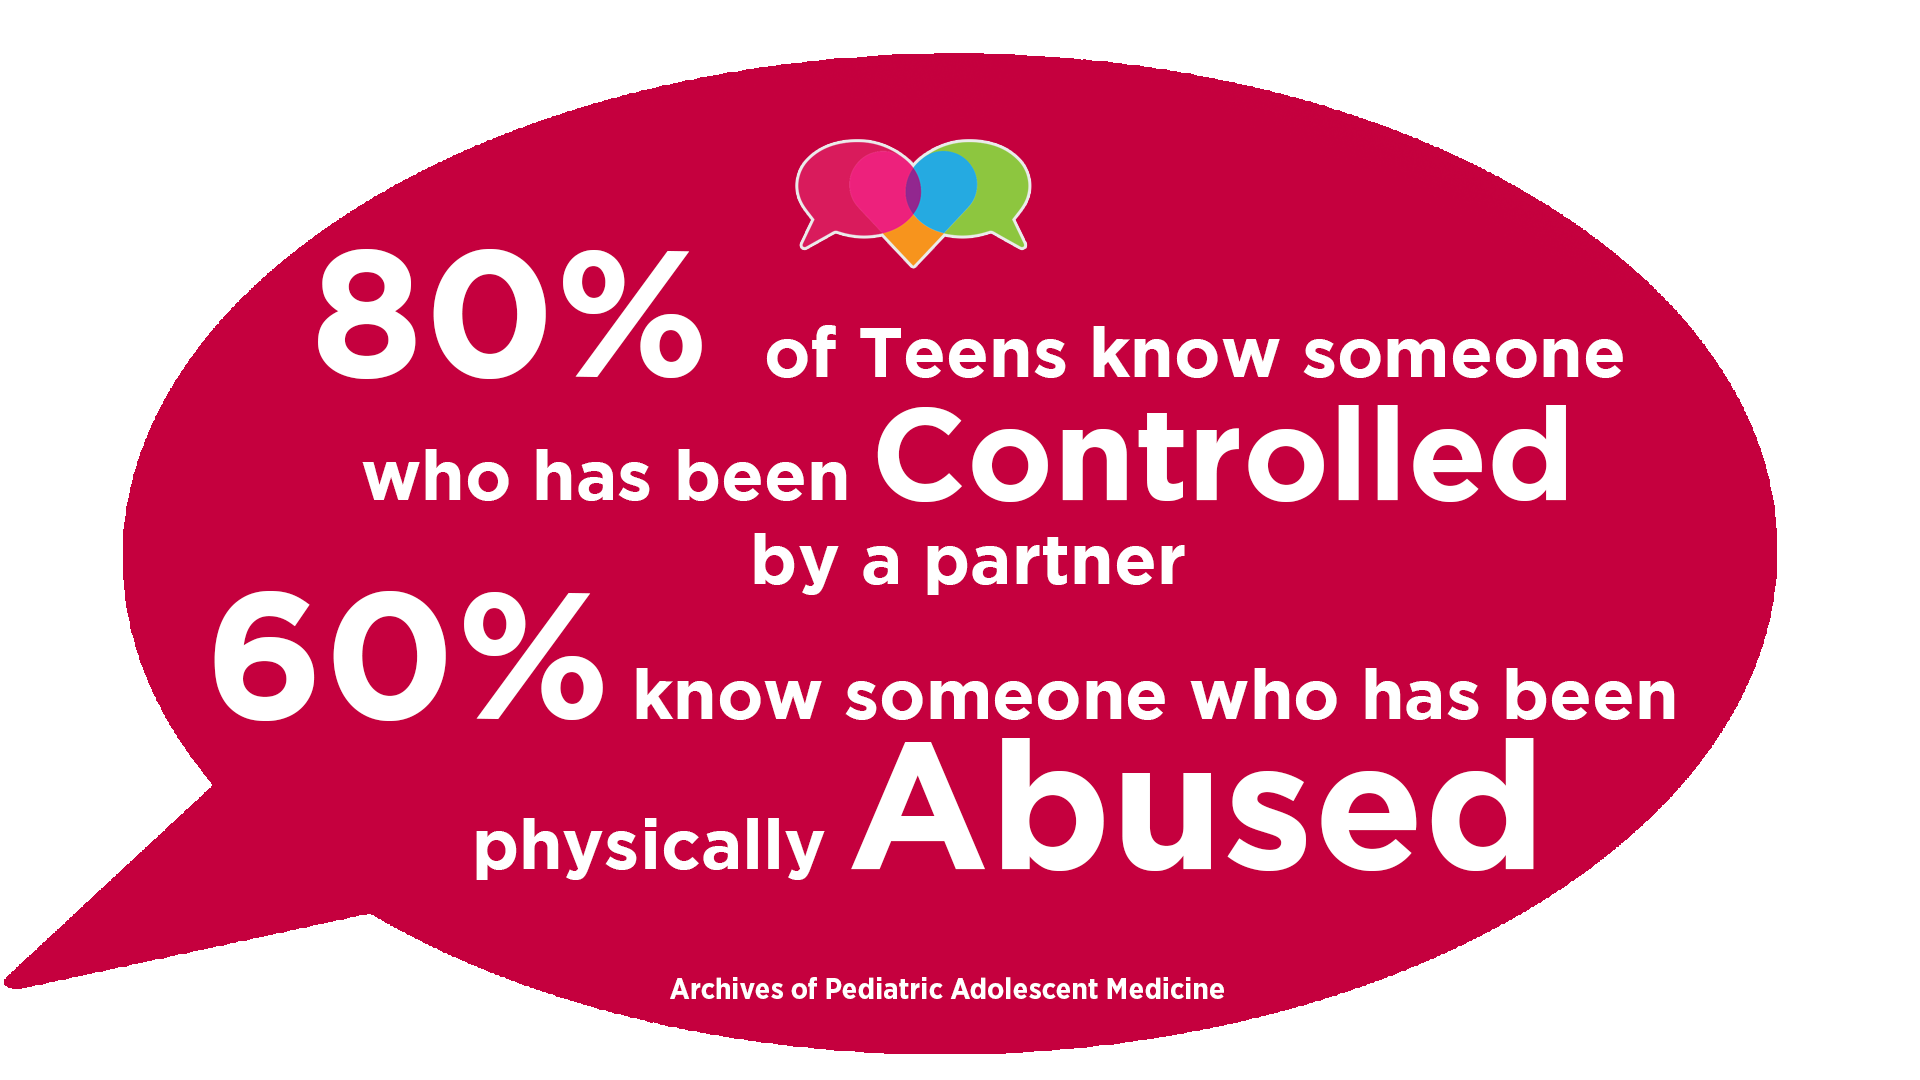 80% of teens know someone who has been controlled by a partner. 60% know someone who has been physically abused.